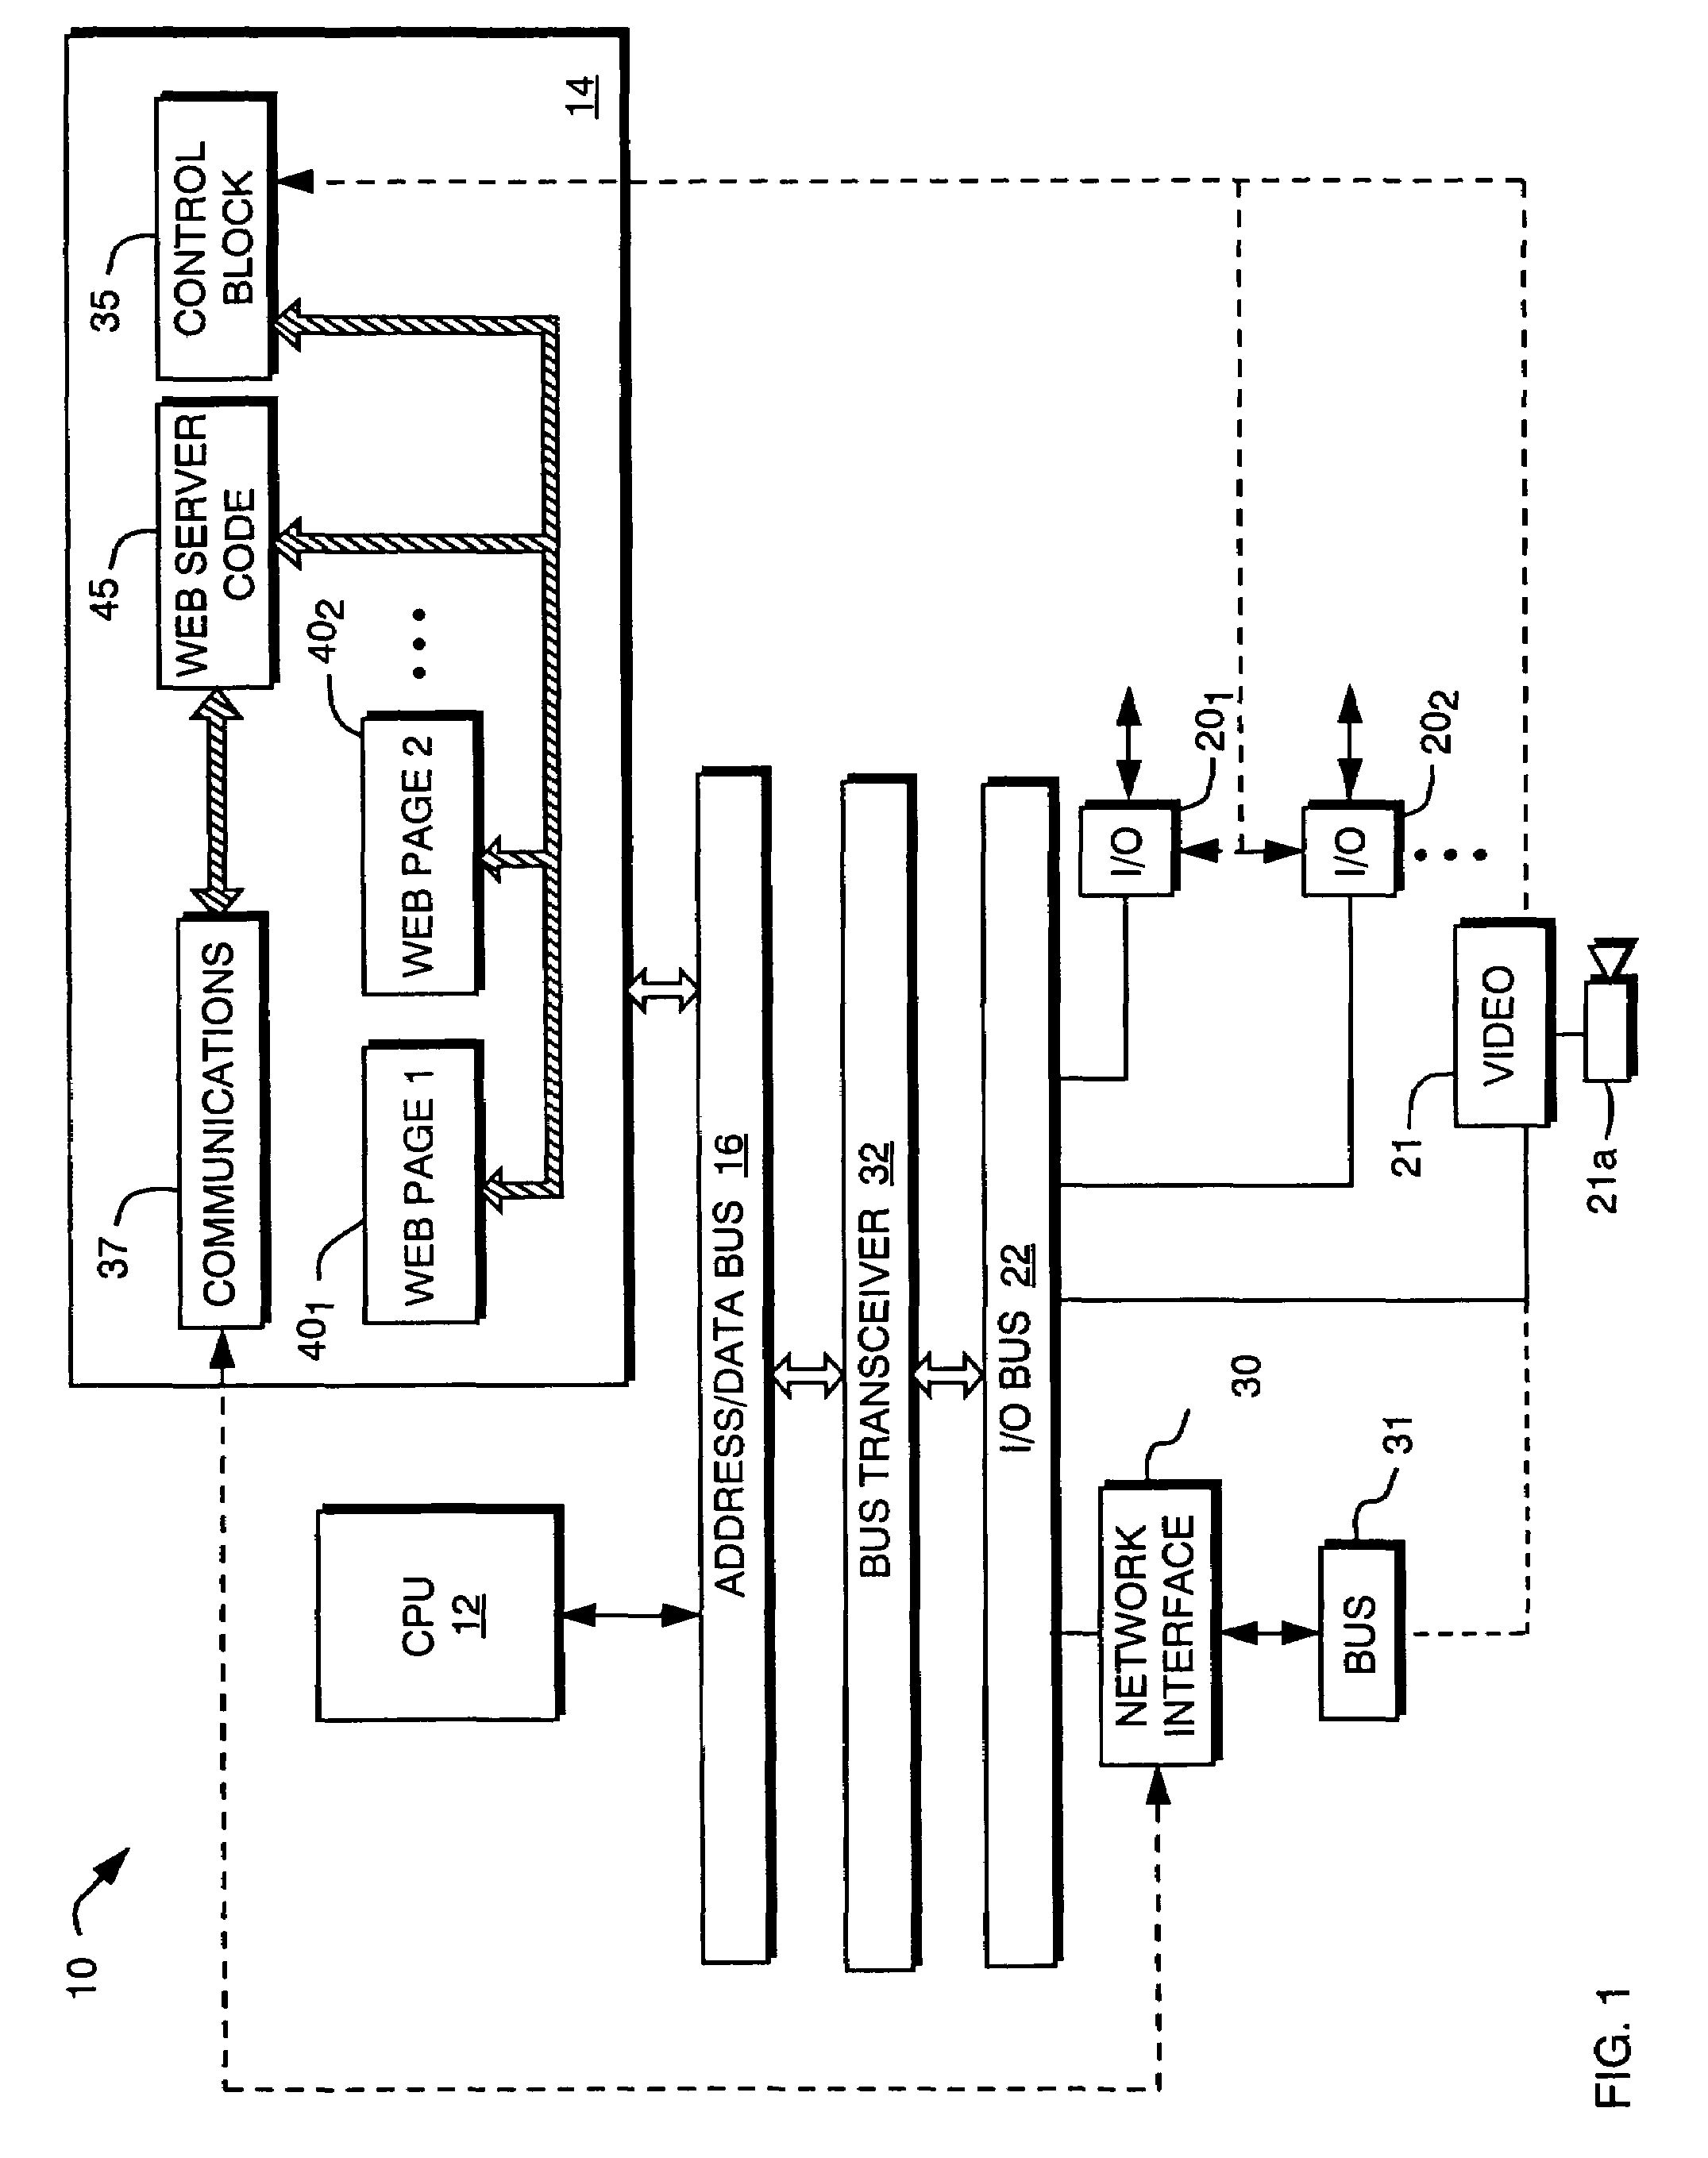 Method and system for monitoring a controller and displaying data from the controller in a format provided by the controller